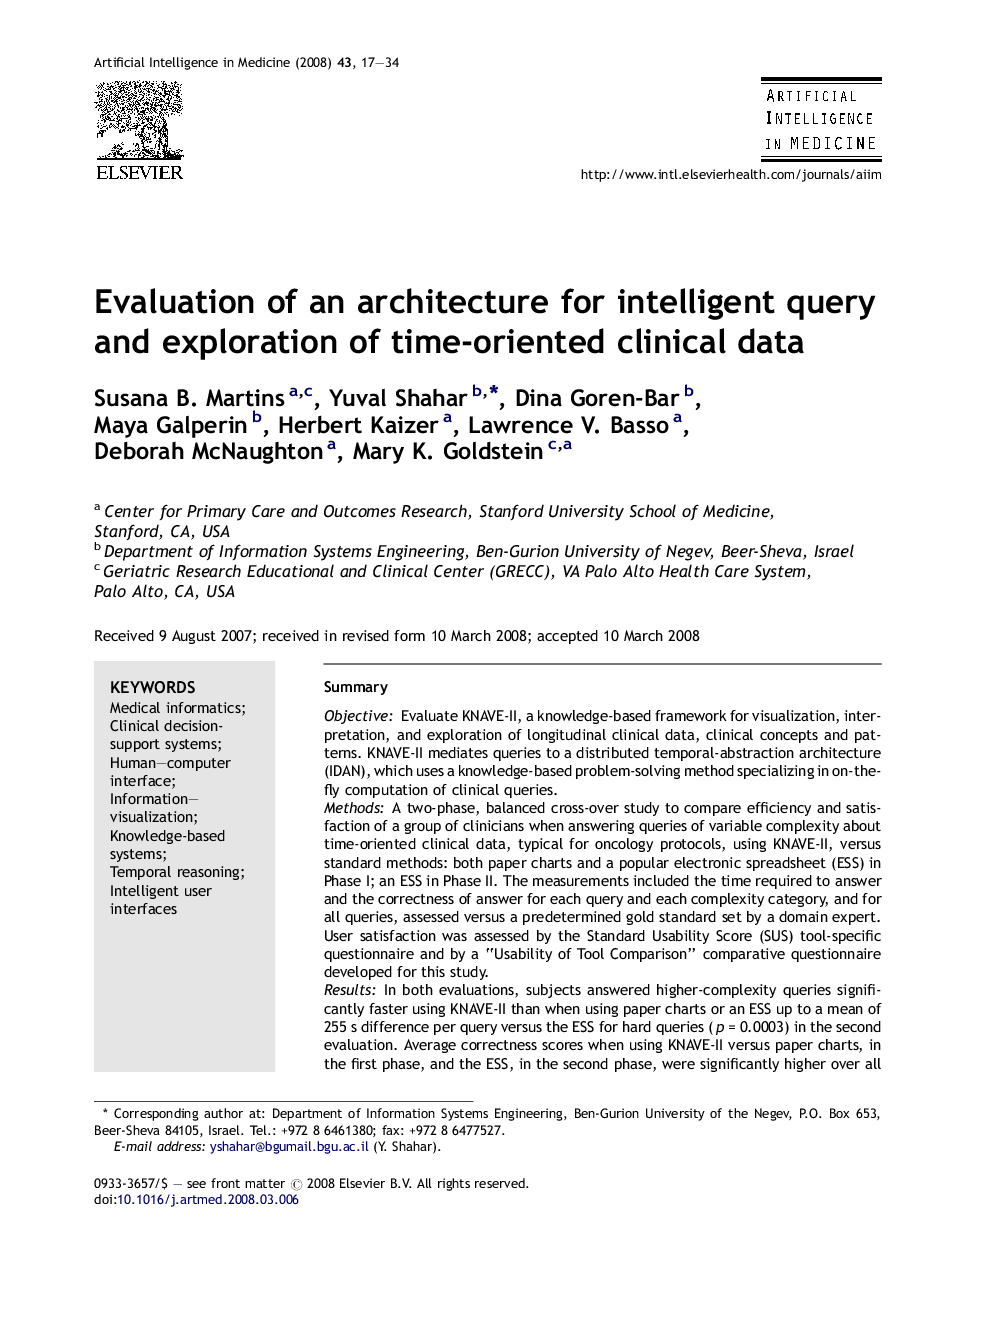 Evaluation of an architecture for intelligent query and exploration of time-oriented clinical data